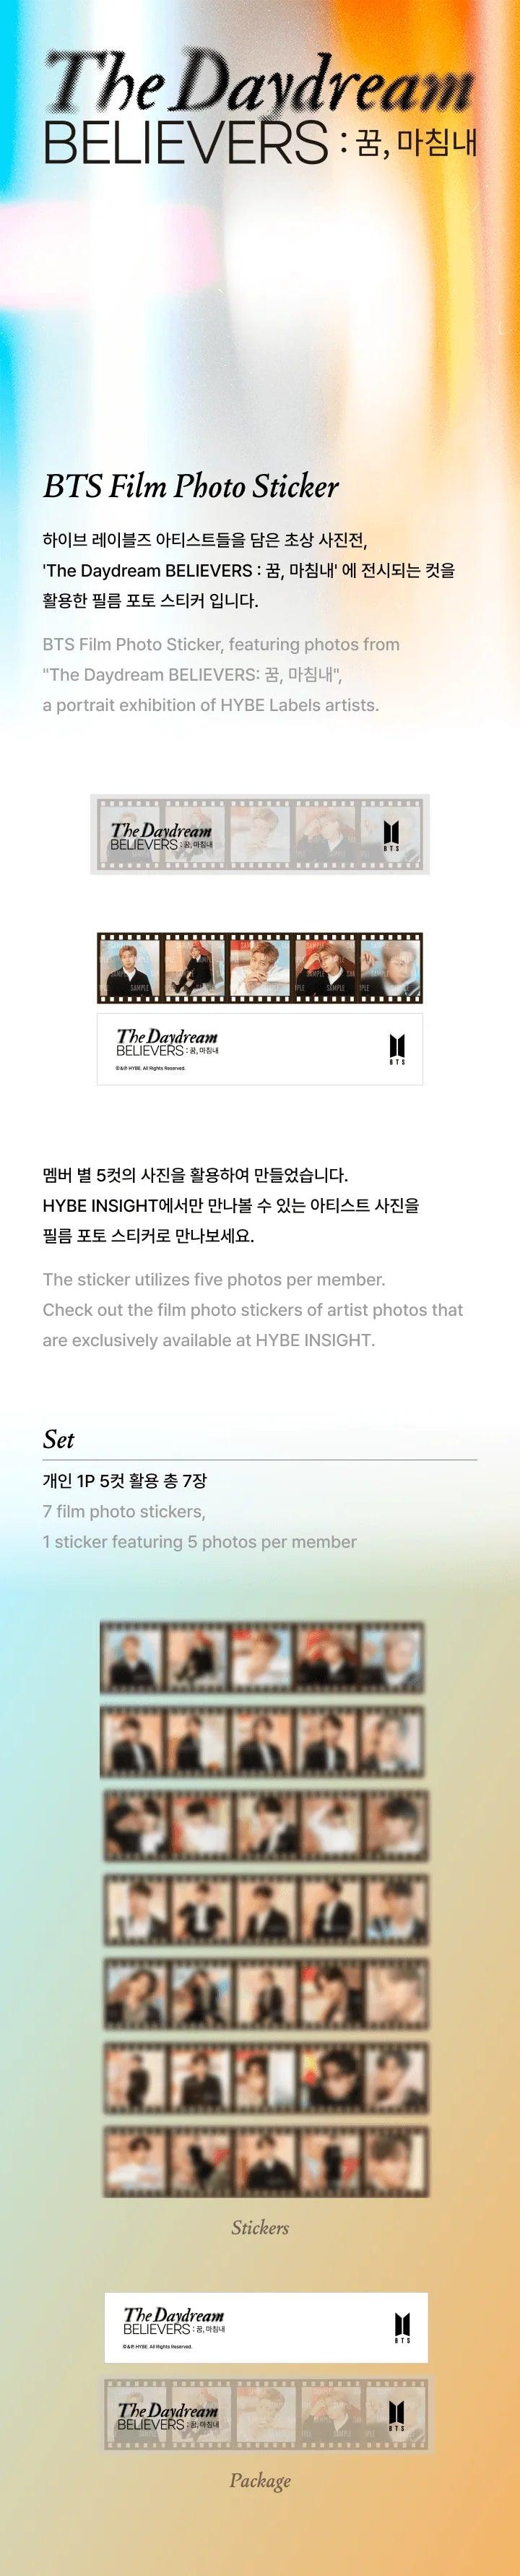 BTS - THE DAYDREAM BELIEVERS OFFICIAL MD - KAEPJJANG SHOP (캡짱 숍)